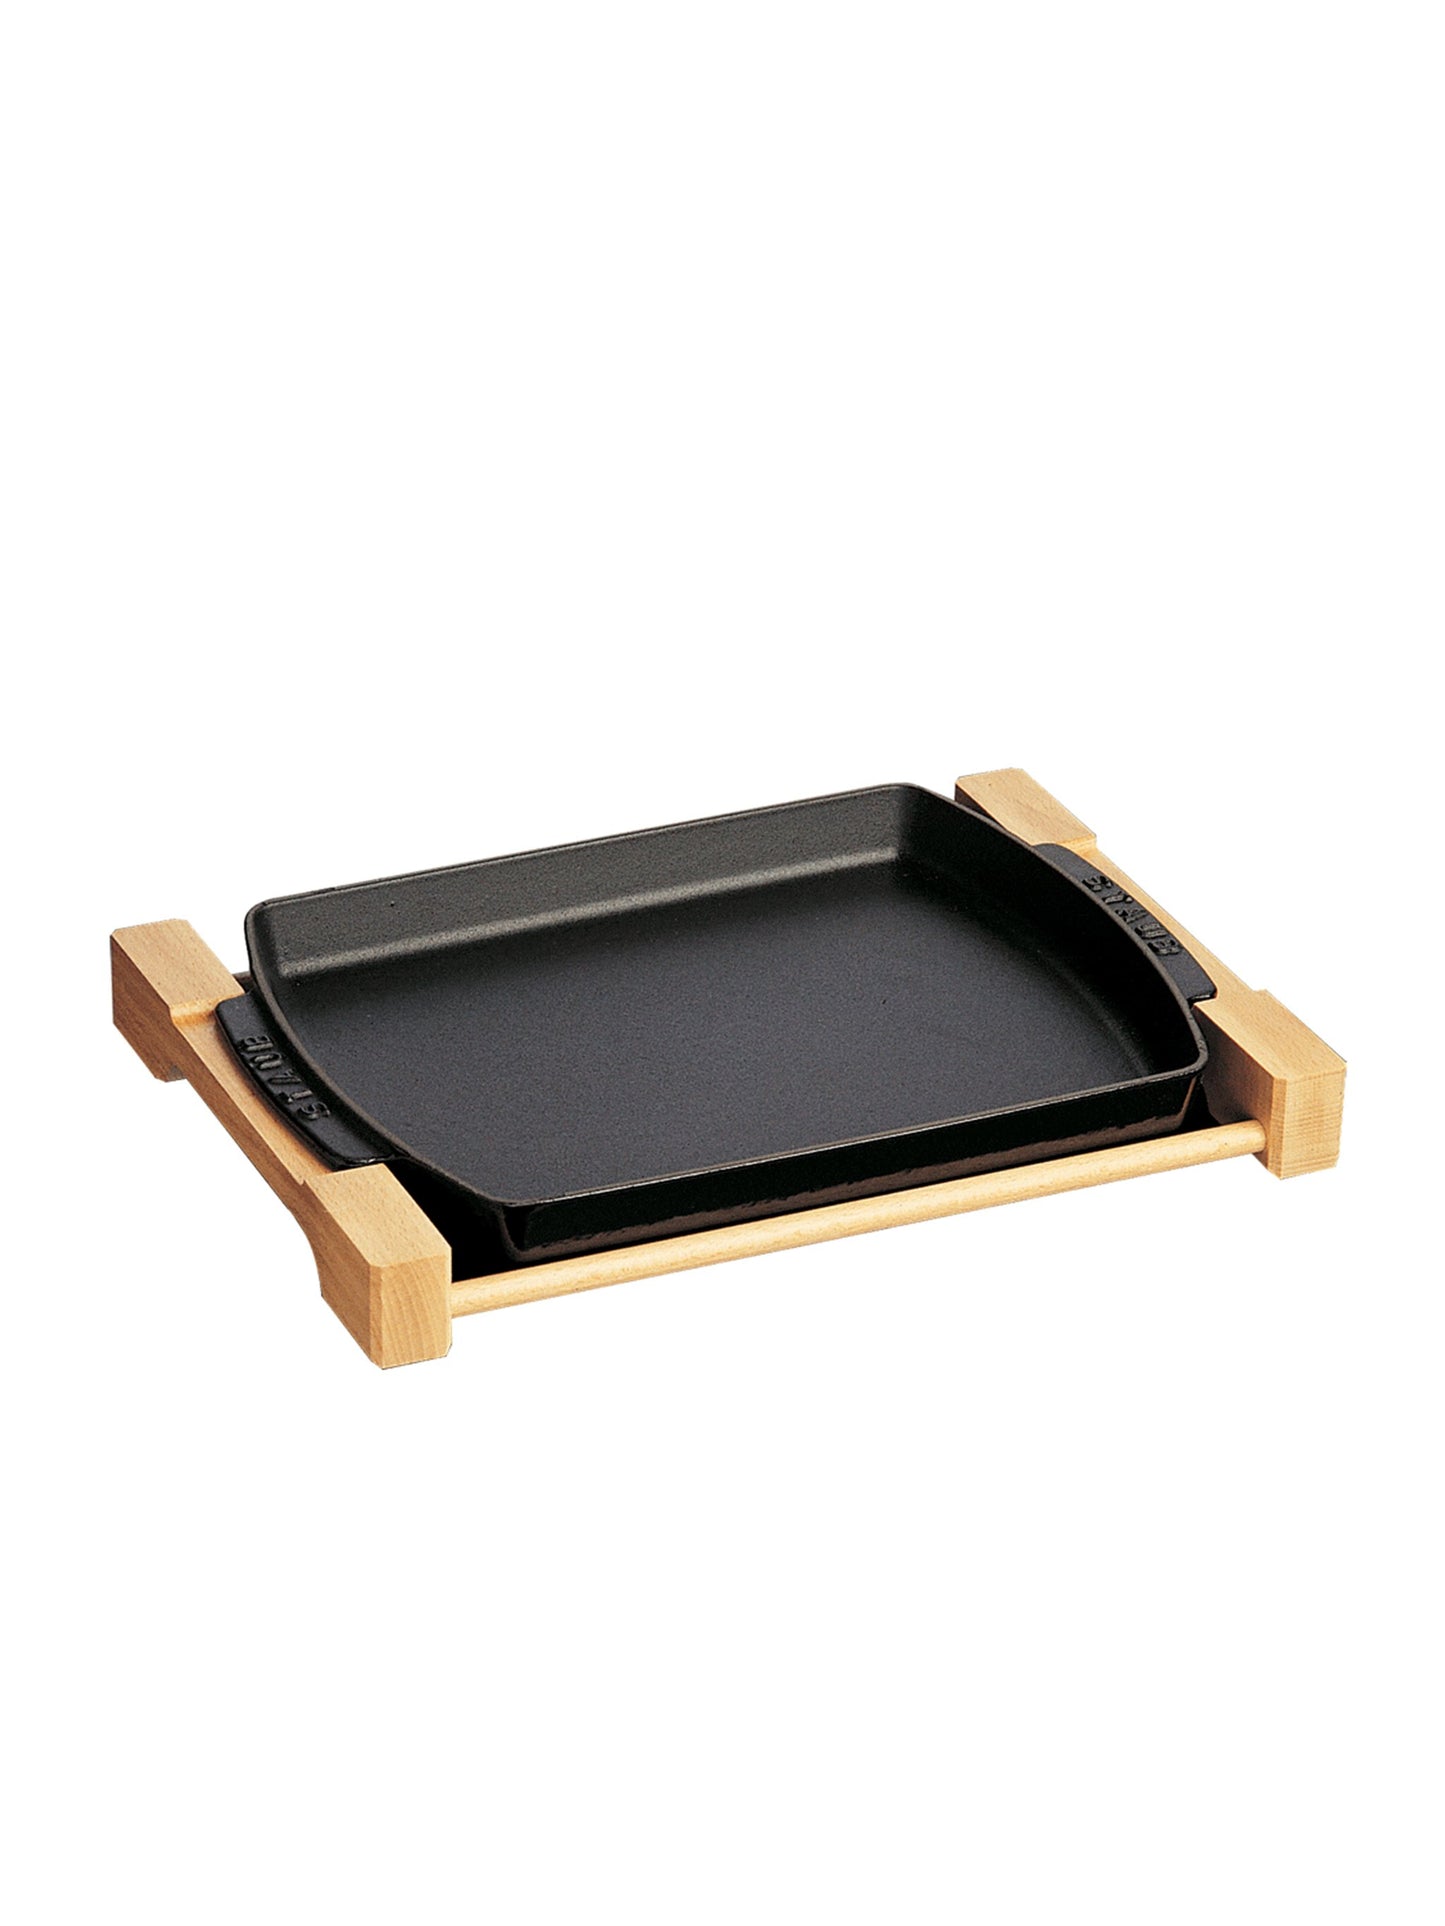 https://westontable.com/cdn/shop/products/Staub-Cast-Iron-Rectangular-Serving-Dish-with-Wood-Base-Weston-Table_fe0ceebf-0bc3-48a3-a5bc-62f587e648f6.jpg?v=1608739342&width=1445